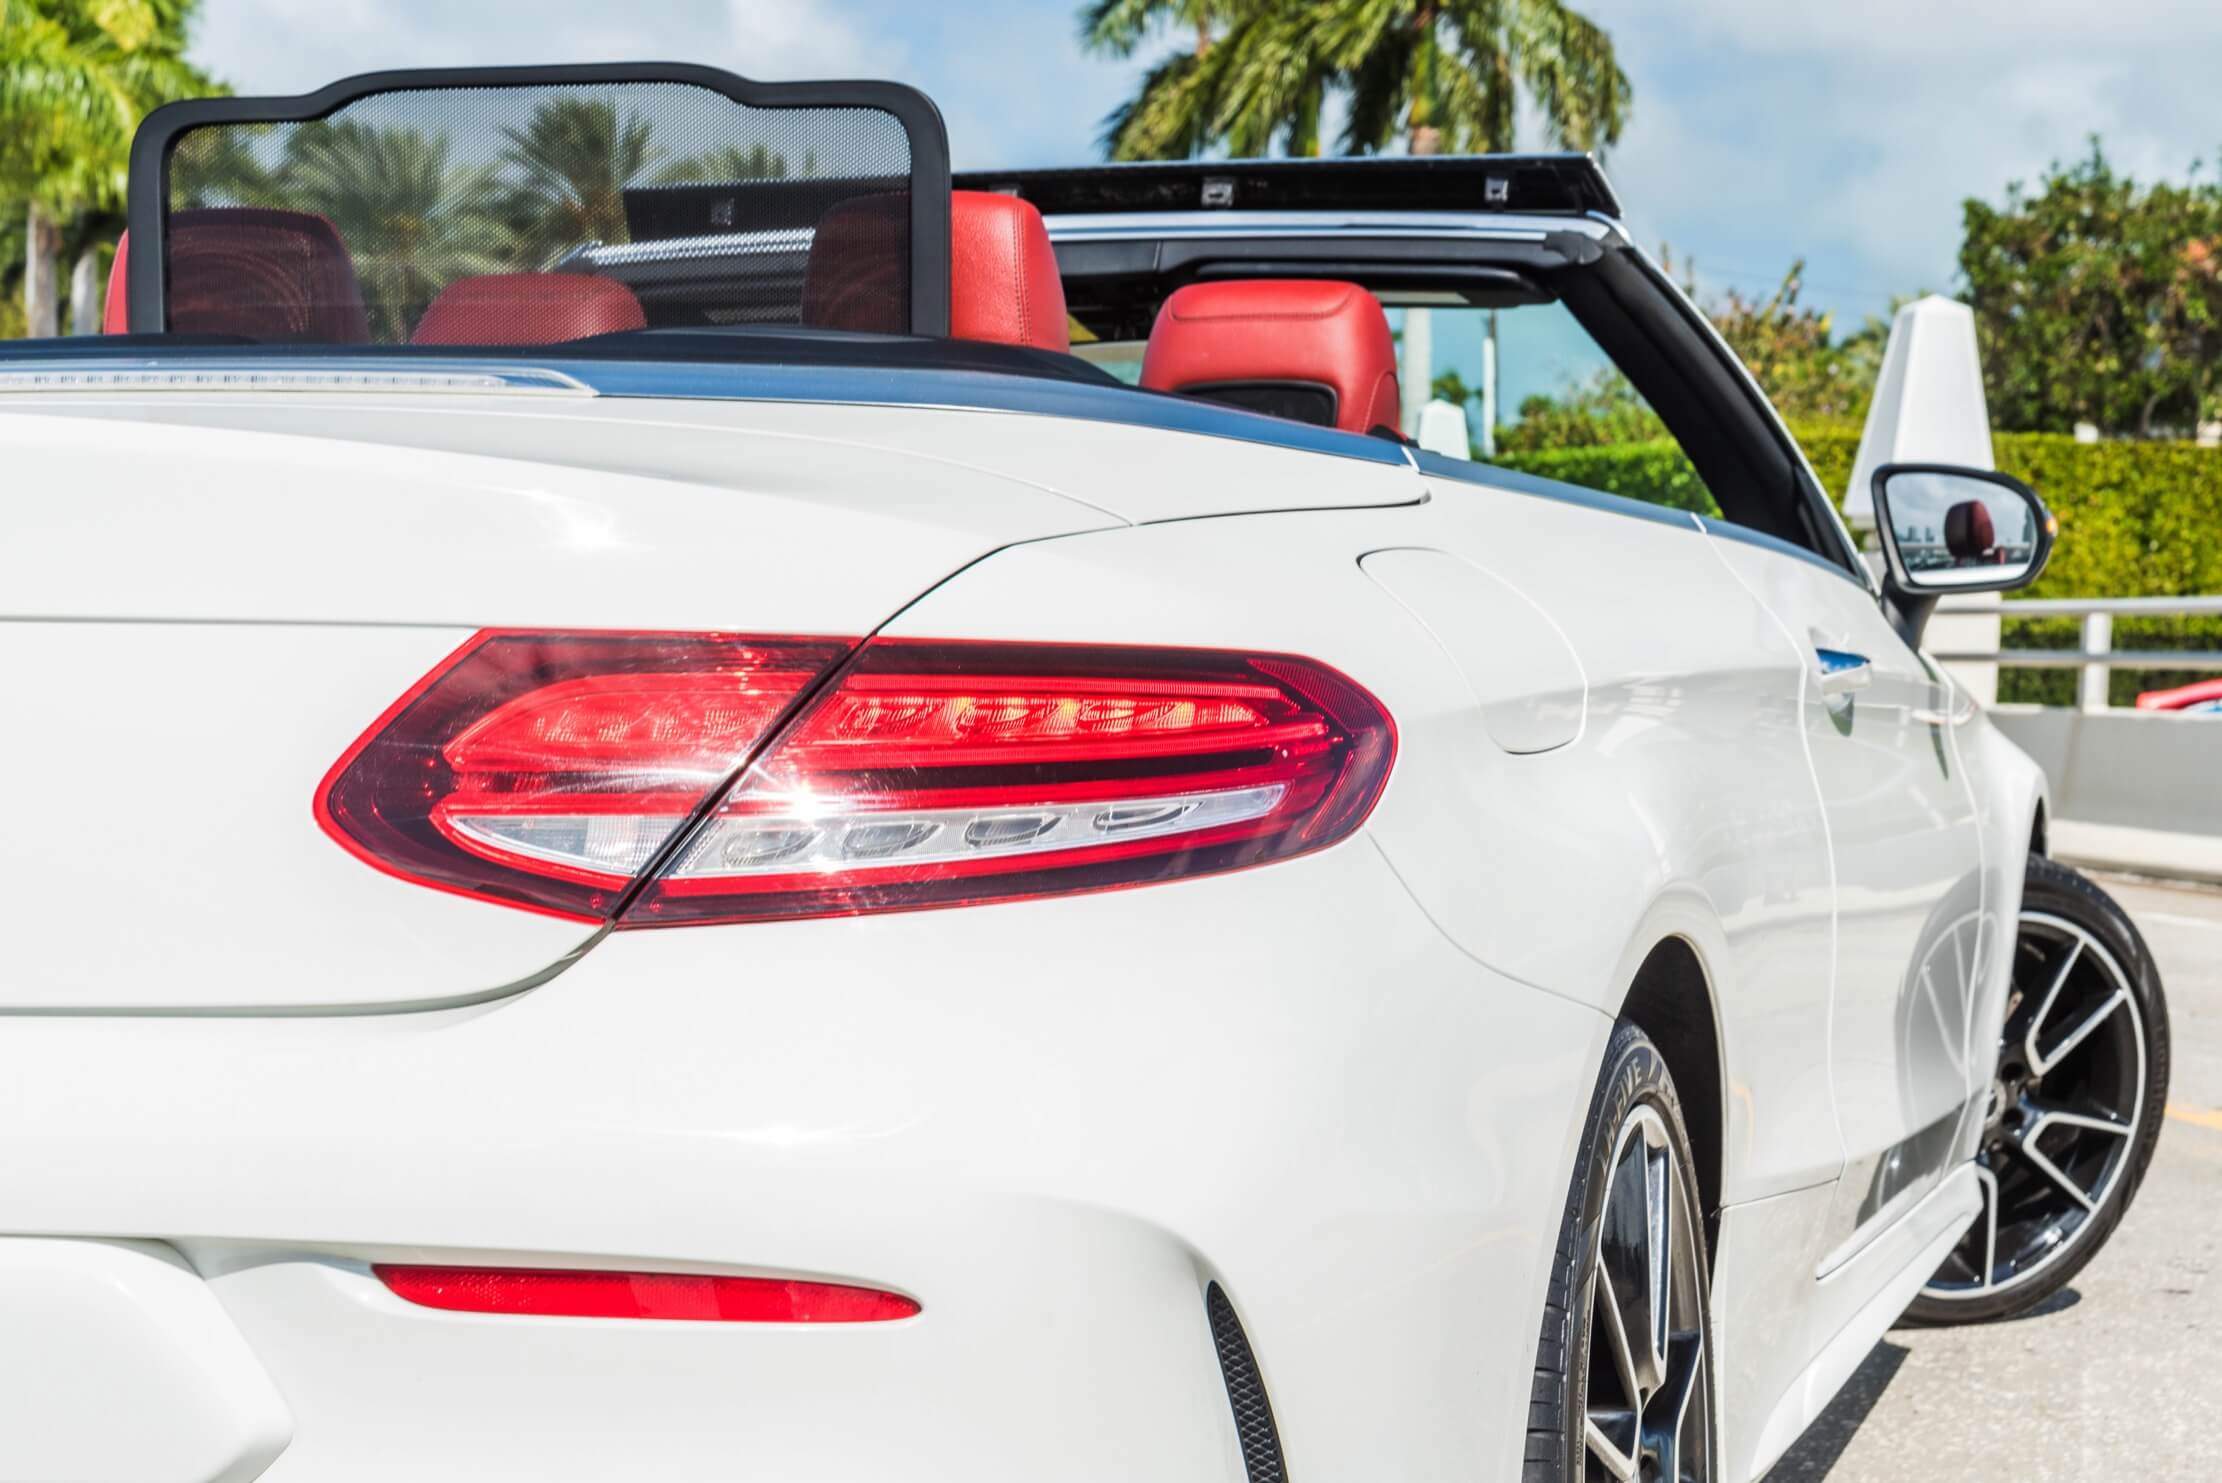 2019_MERCEDES BENZ_C300-CONVERTIBLE_WHITE-RED_77